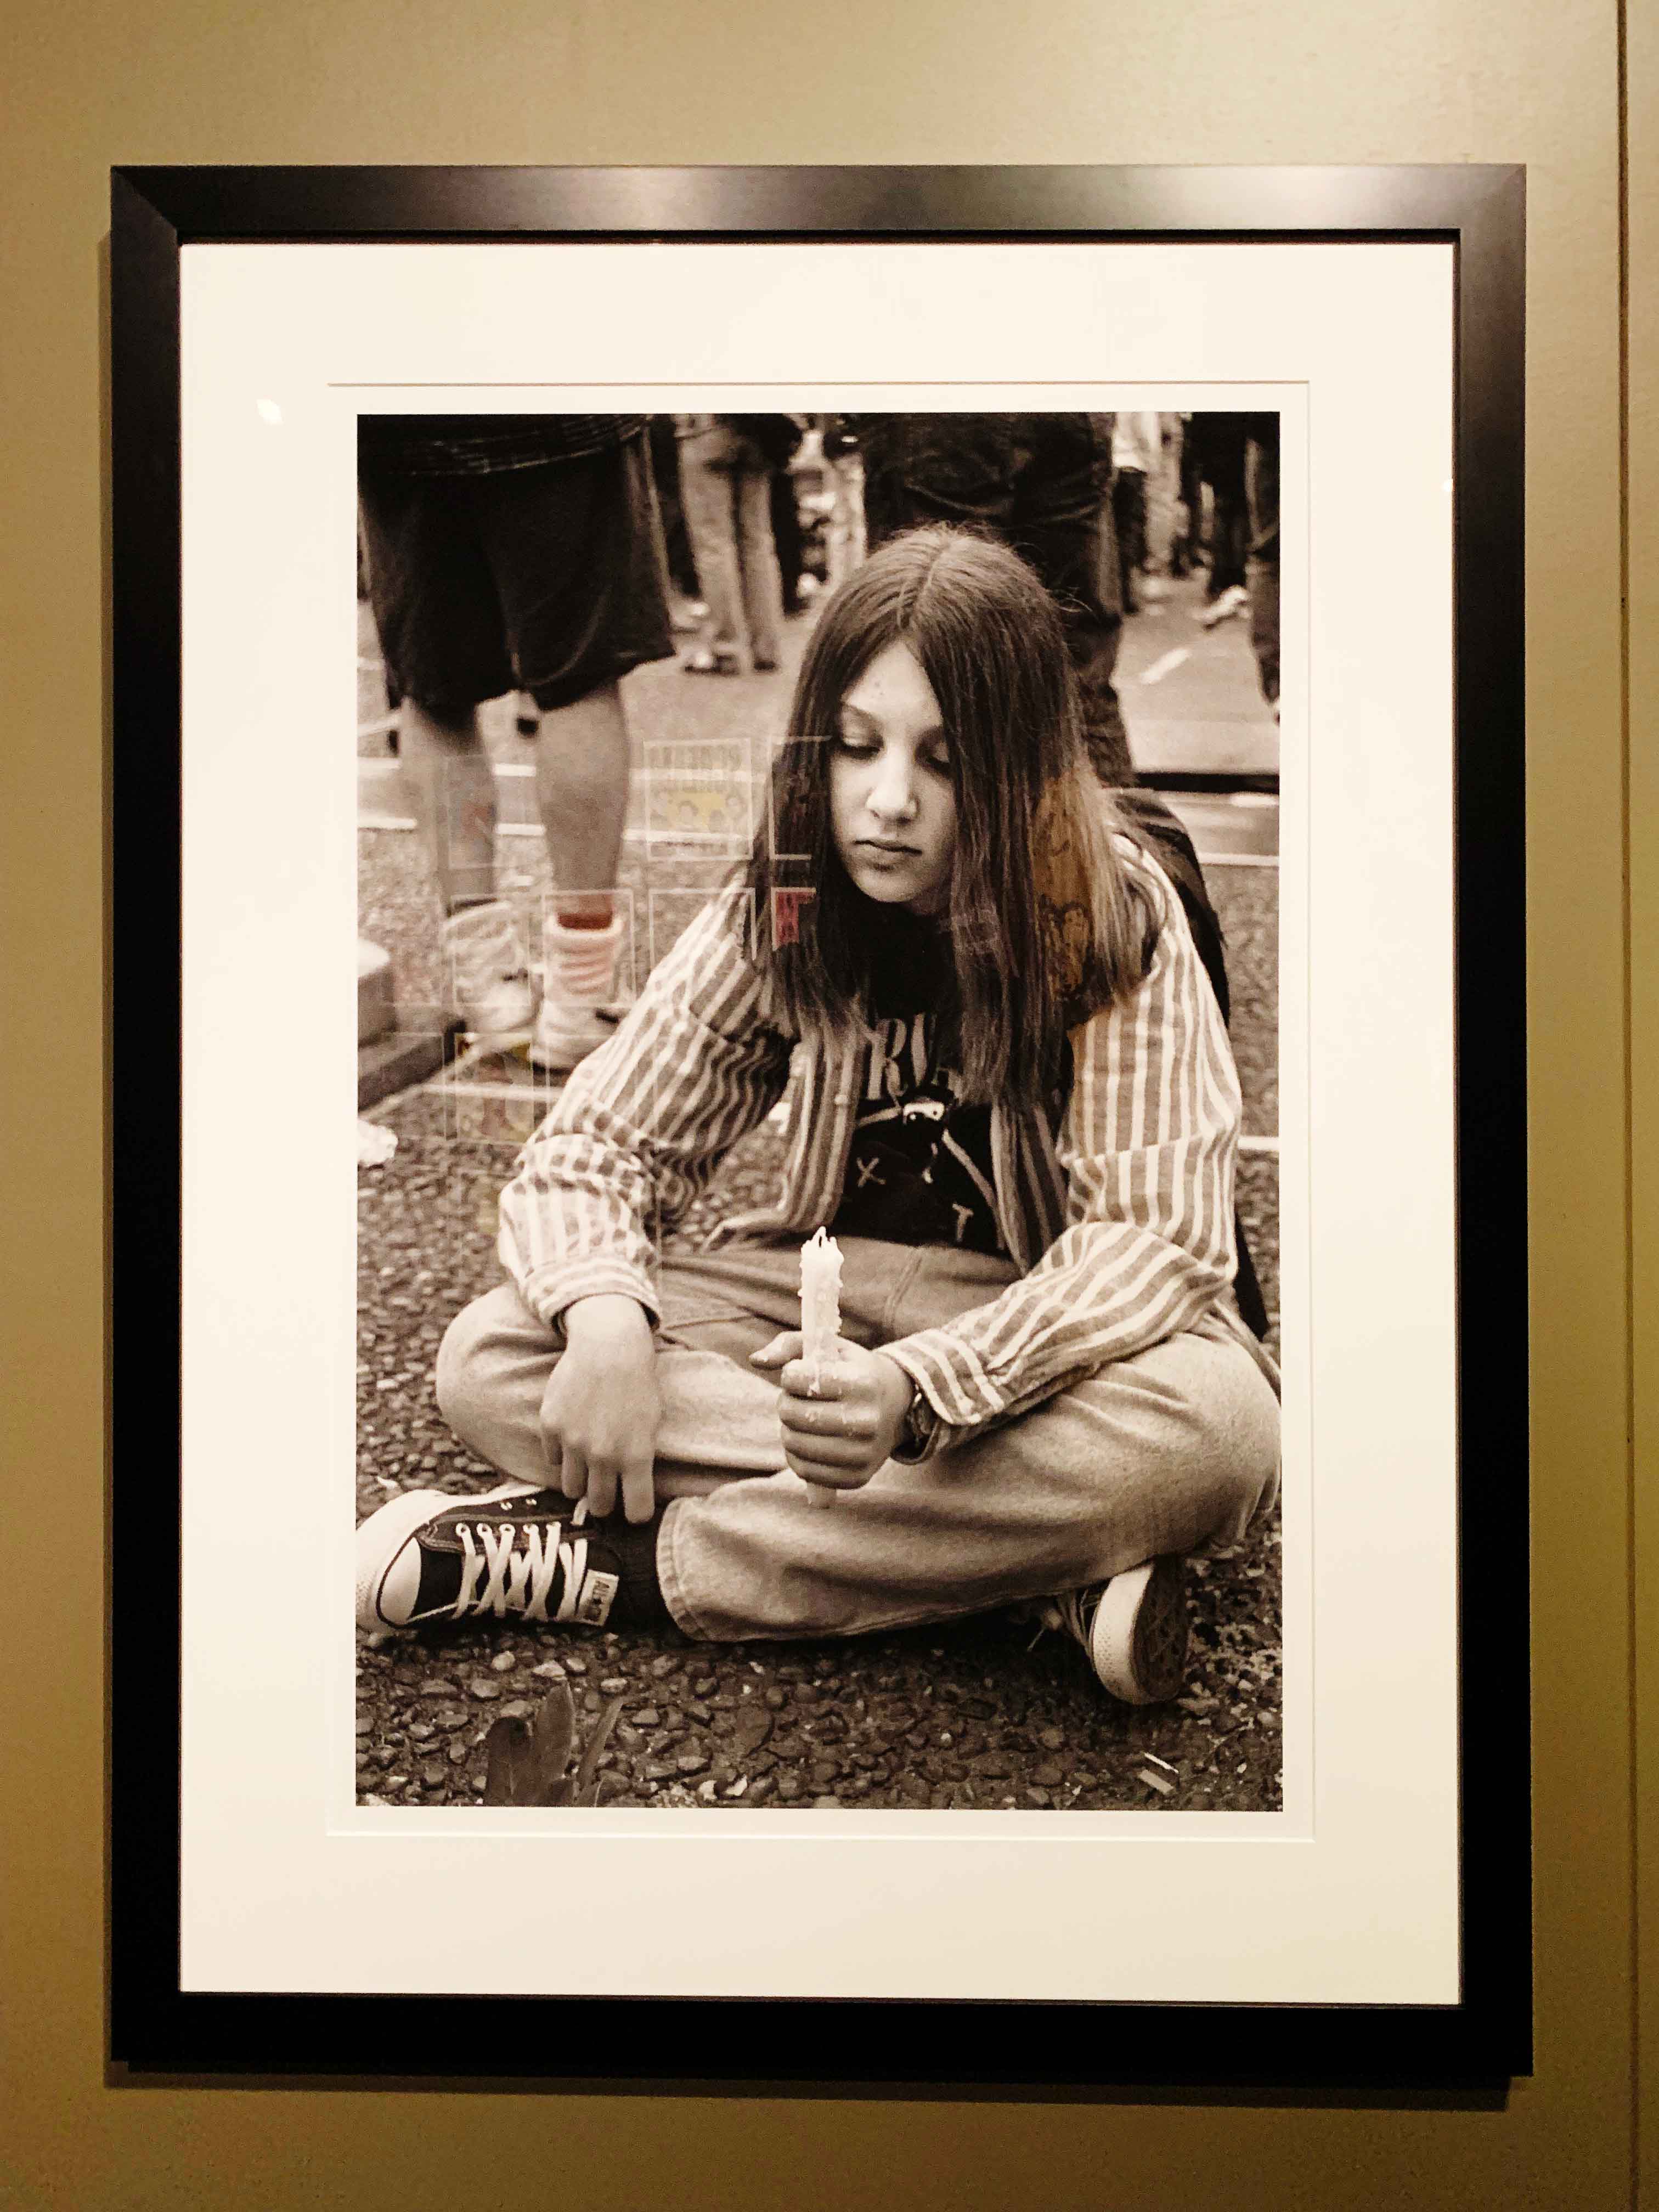 'A Candle for Kurt' Photograph by L.E. Hertel Added to 'Nirvana: Taking Punk to the Masses' Exhibition at MoPOP